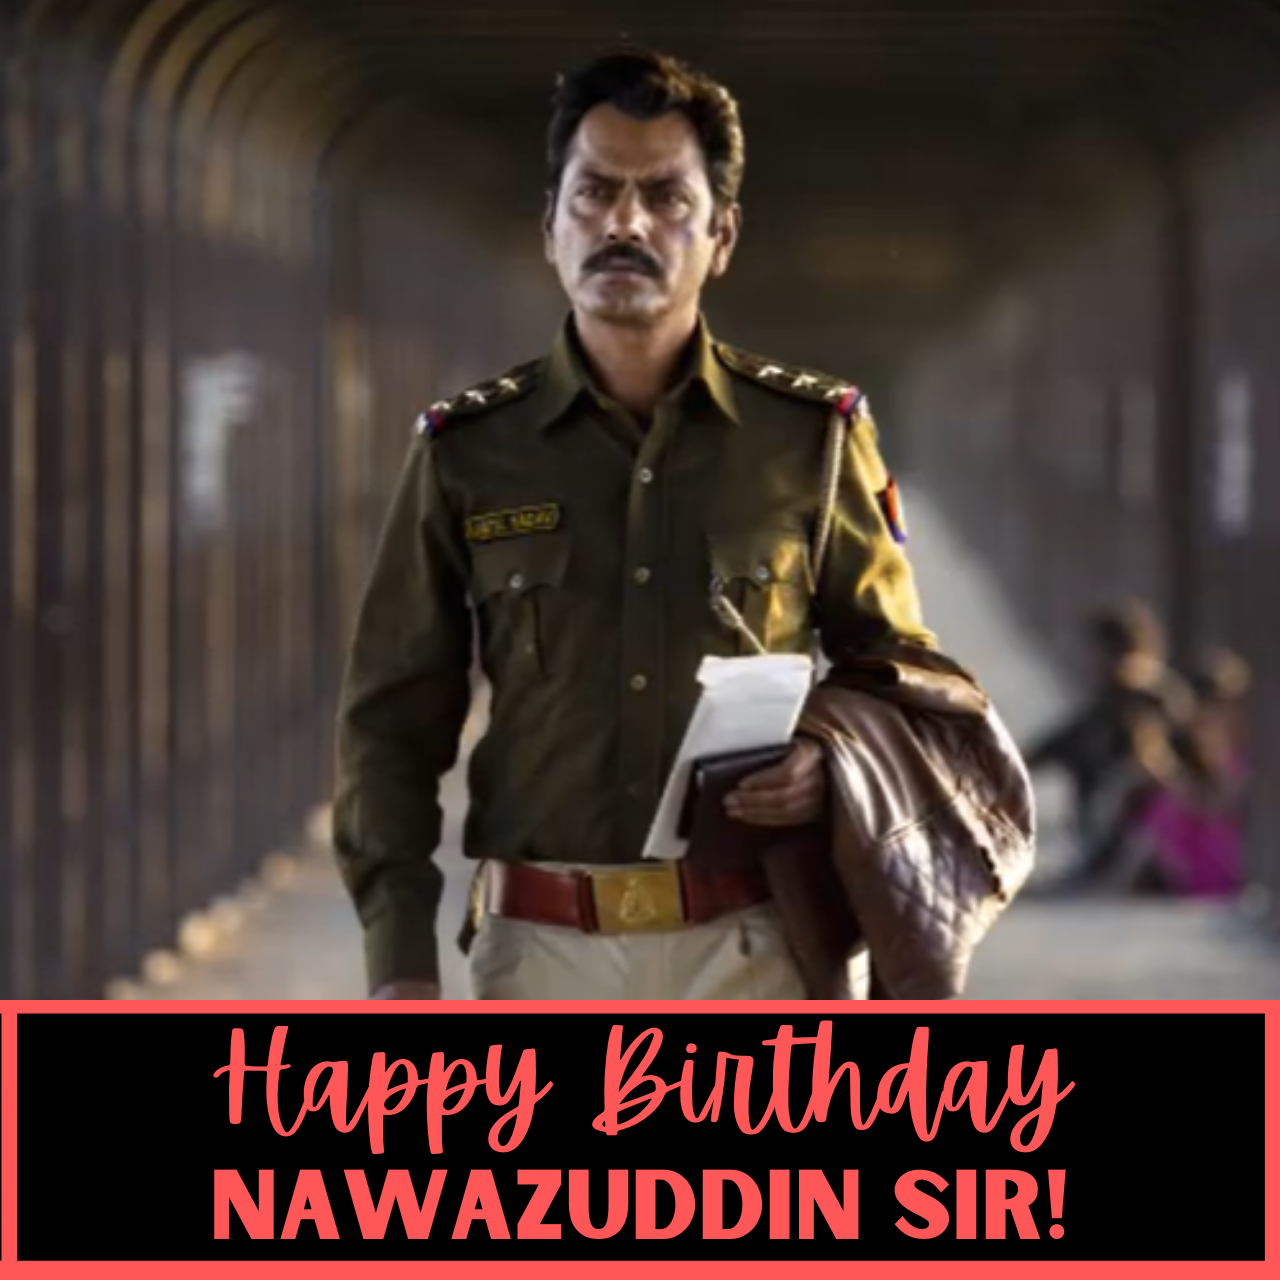 Happy Birthday Nawazuddin Siddiqui: Wishes, Images (photo), Quotes, Greetings, and WhatsApp Status Video